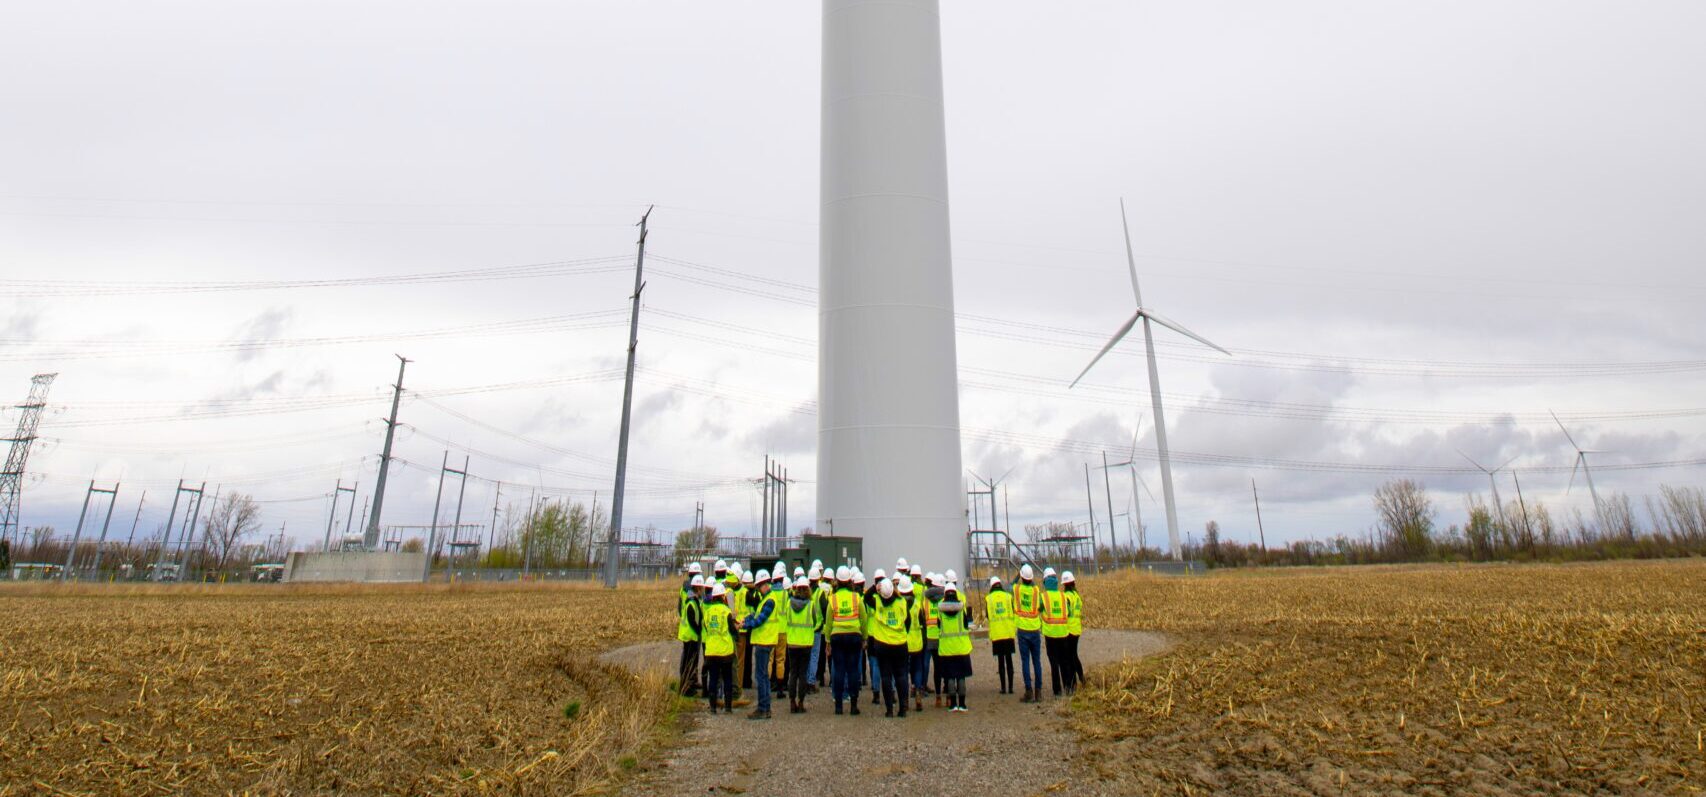 Group of people gather around large windmill